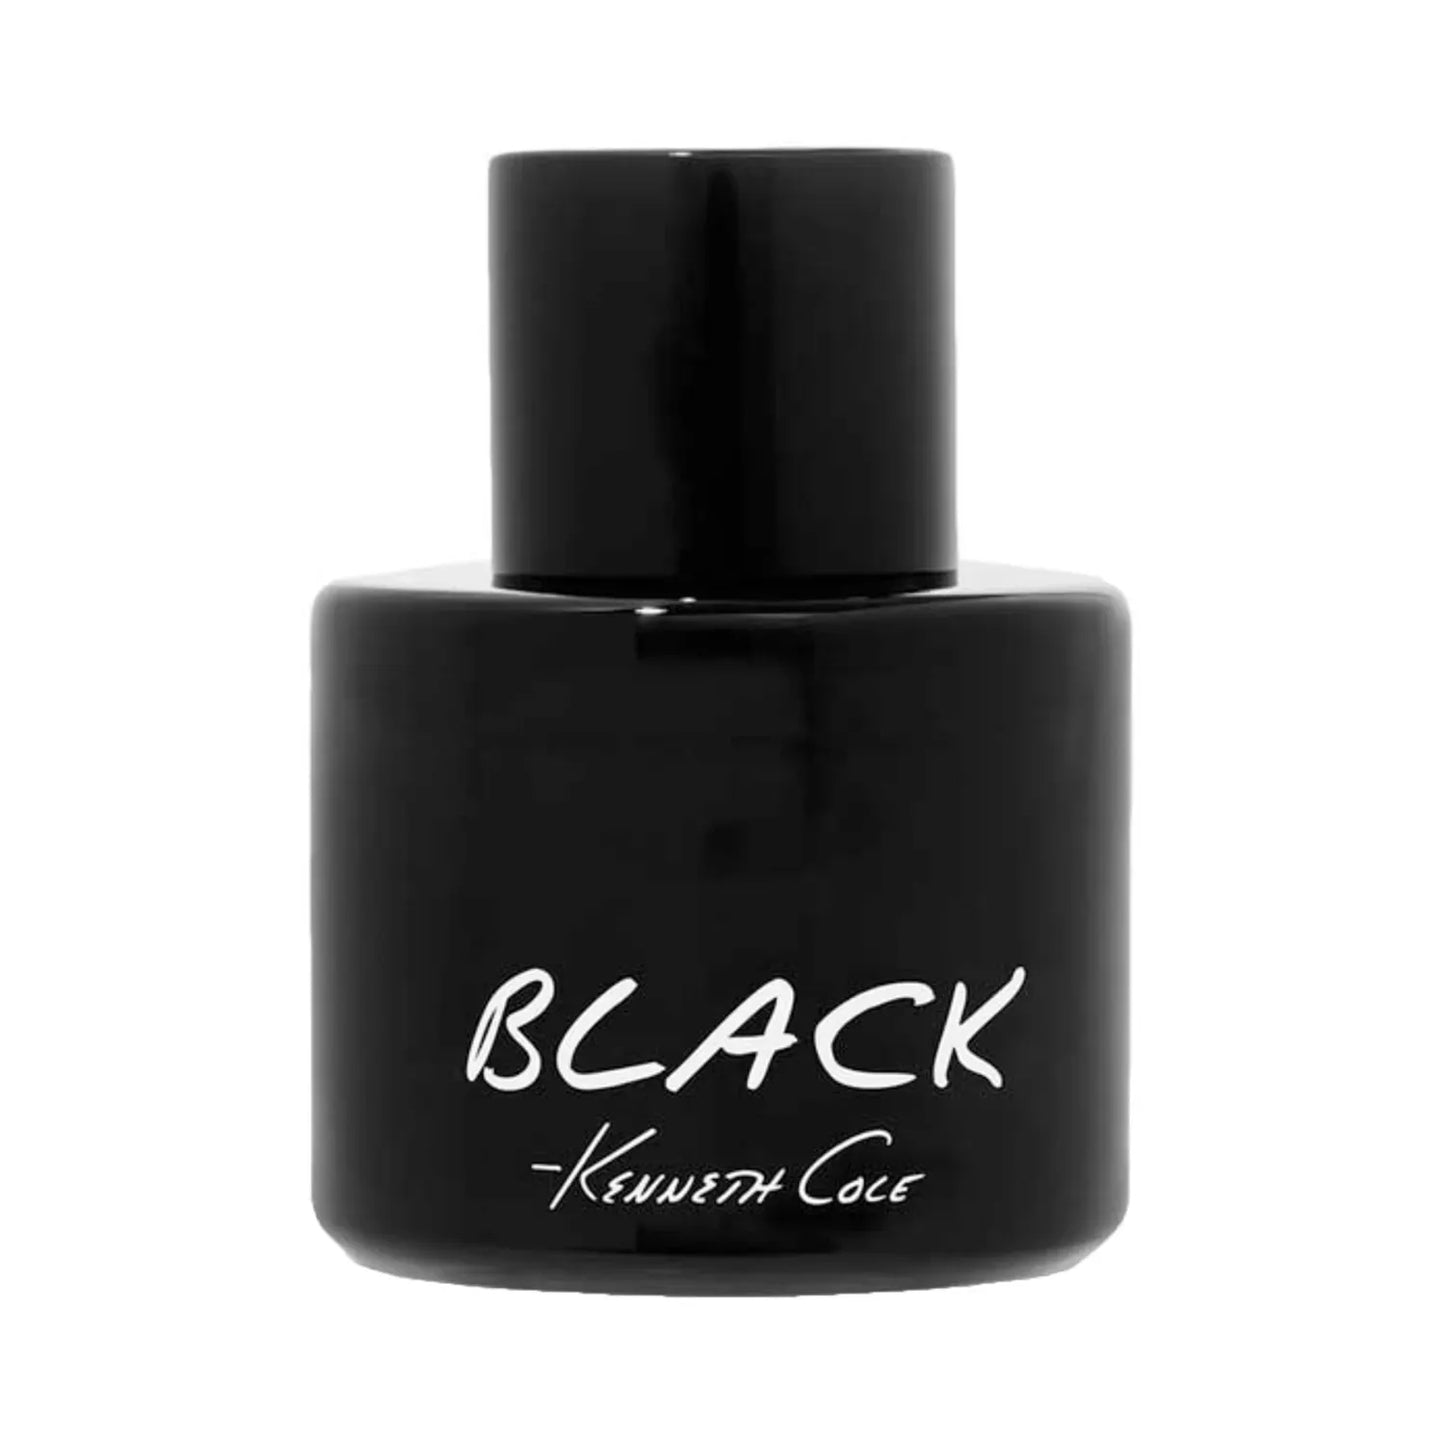 BLACK BY KENNETH COLE EDT 50ml